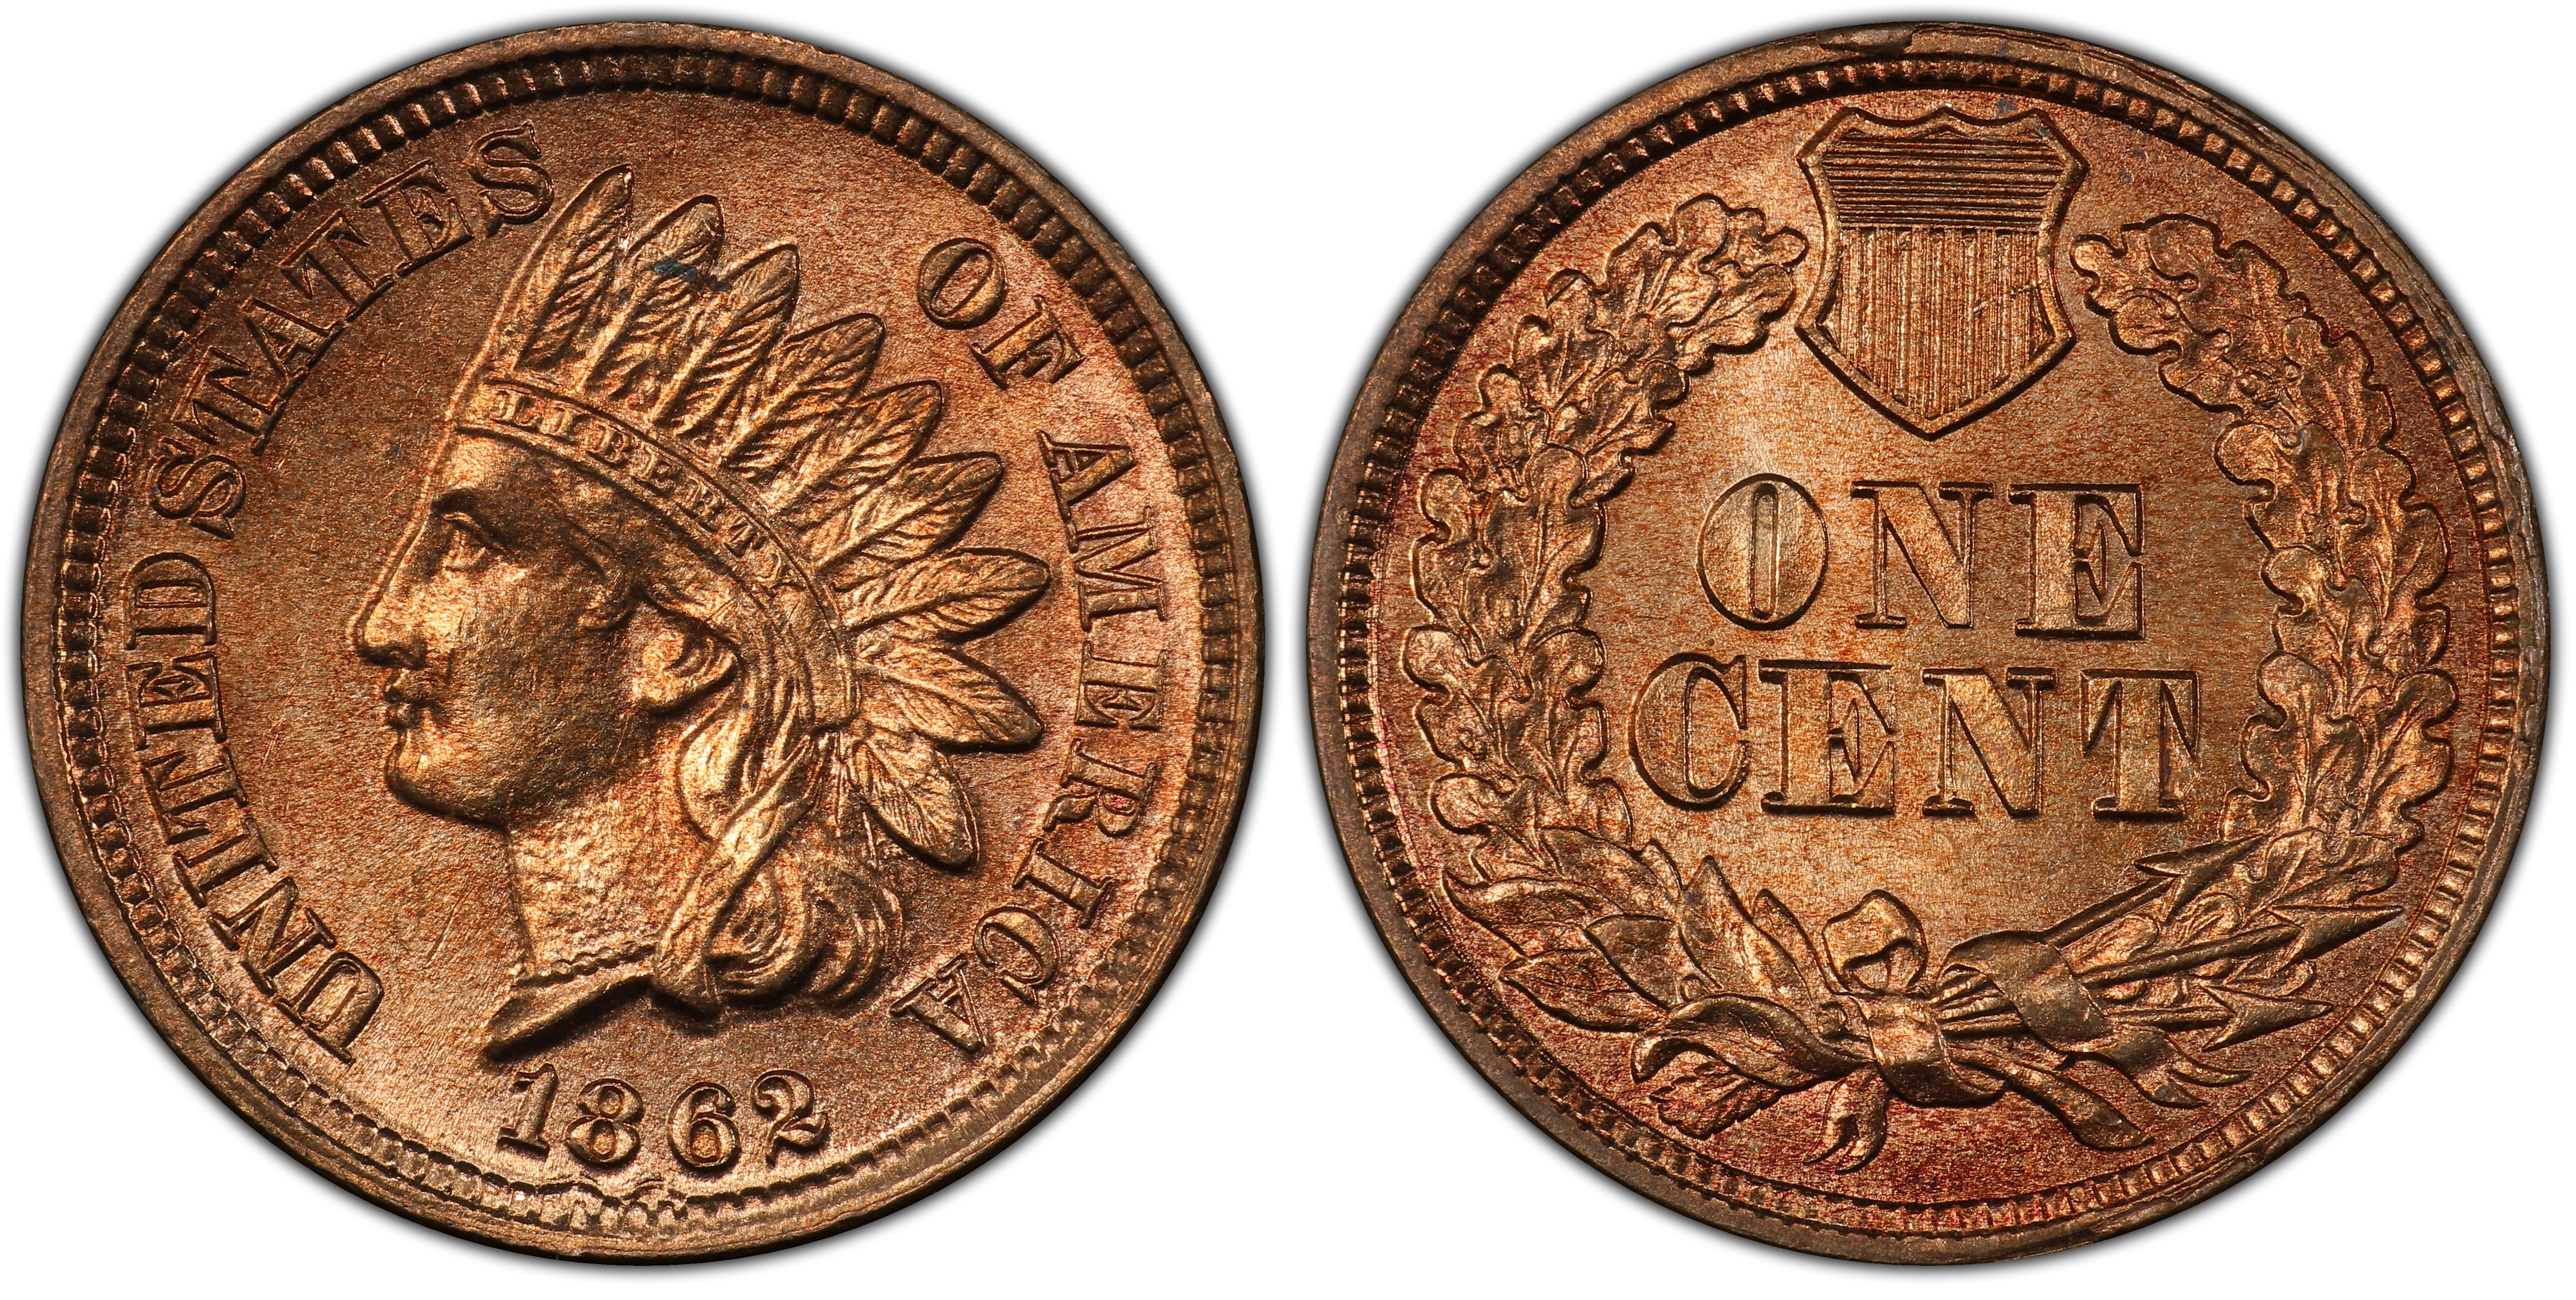 1862 1C MPD FS-301 S-2 (Regular Strike) Indian Cent - PCGS CoinFacts